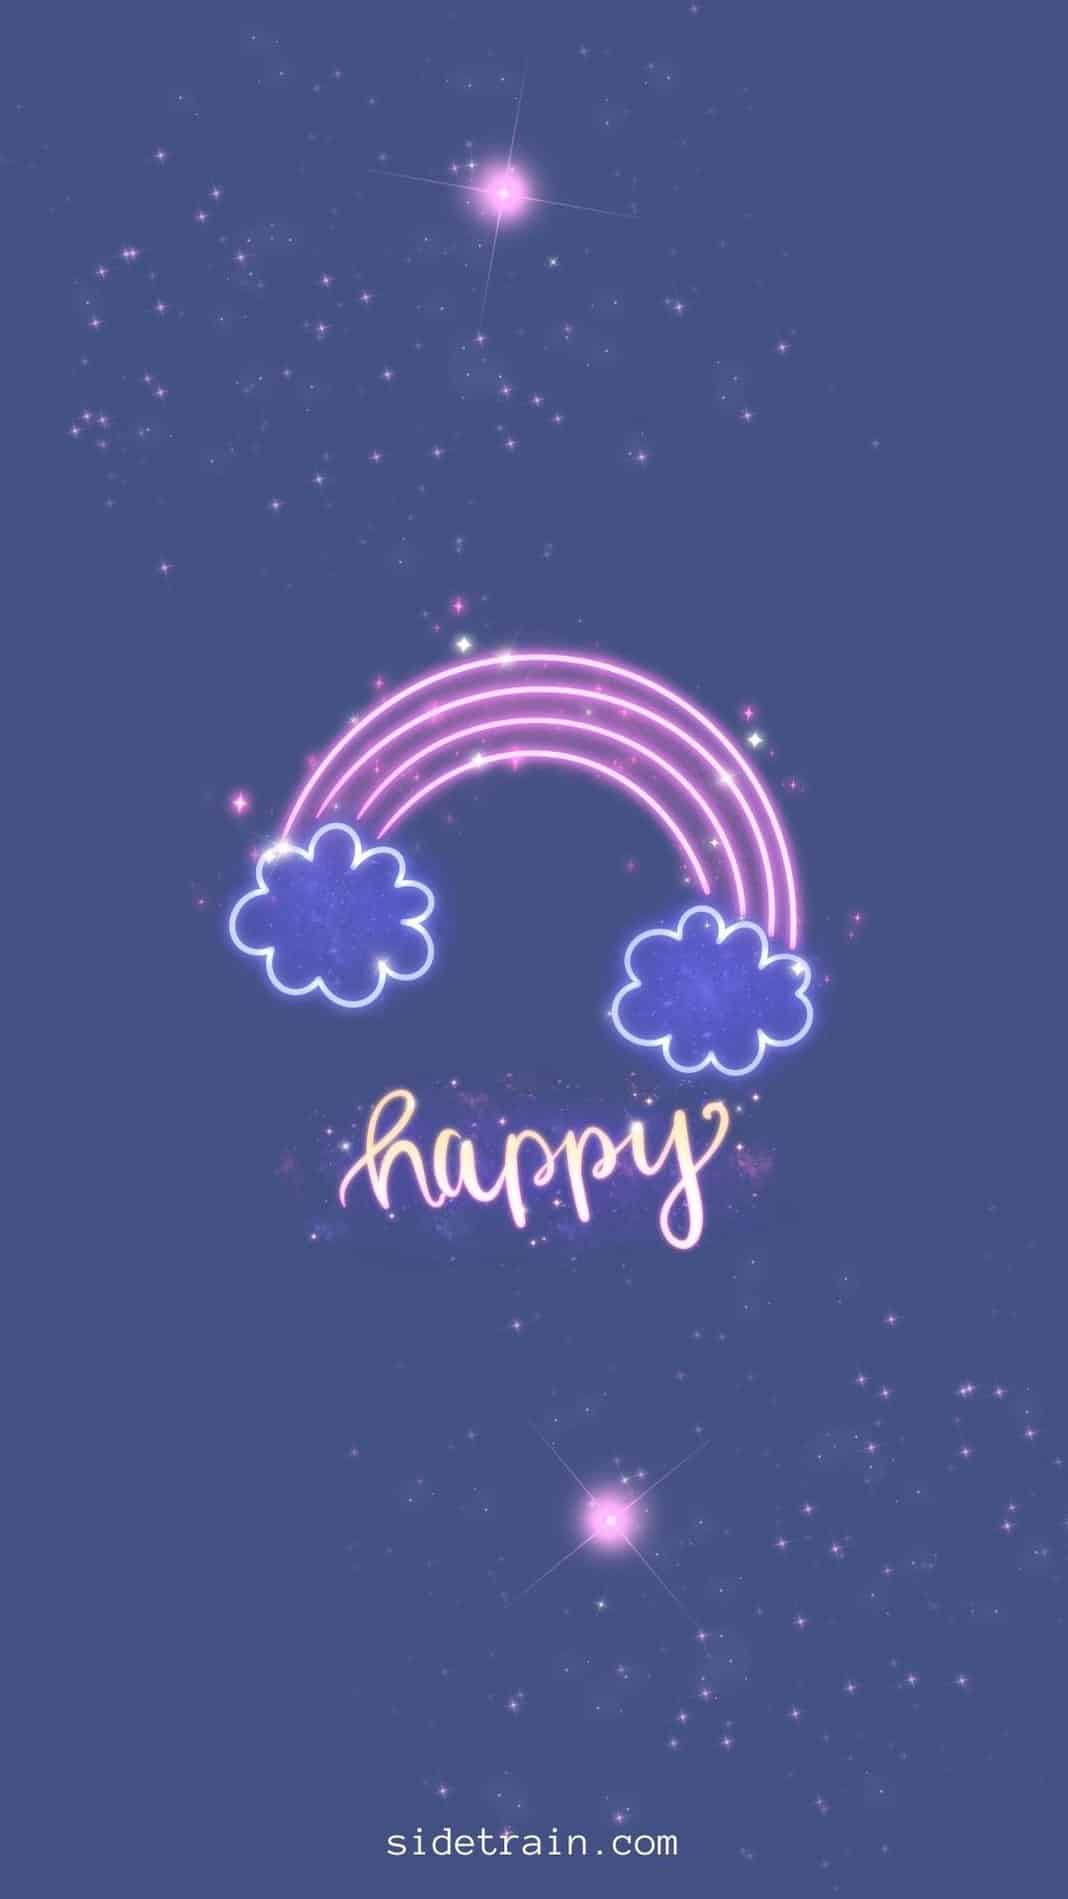 cute wallpaper hd for iphone